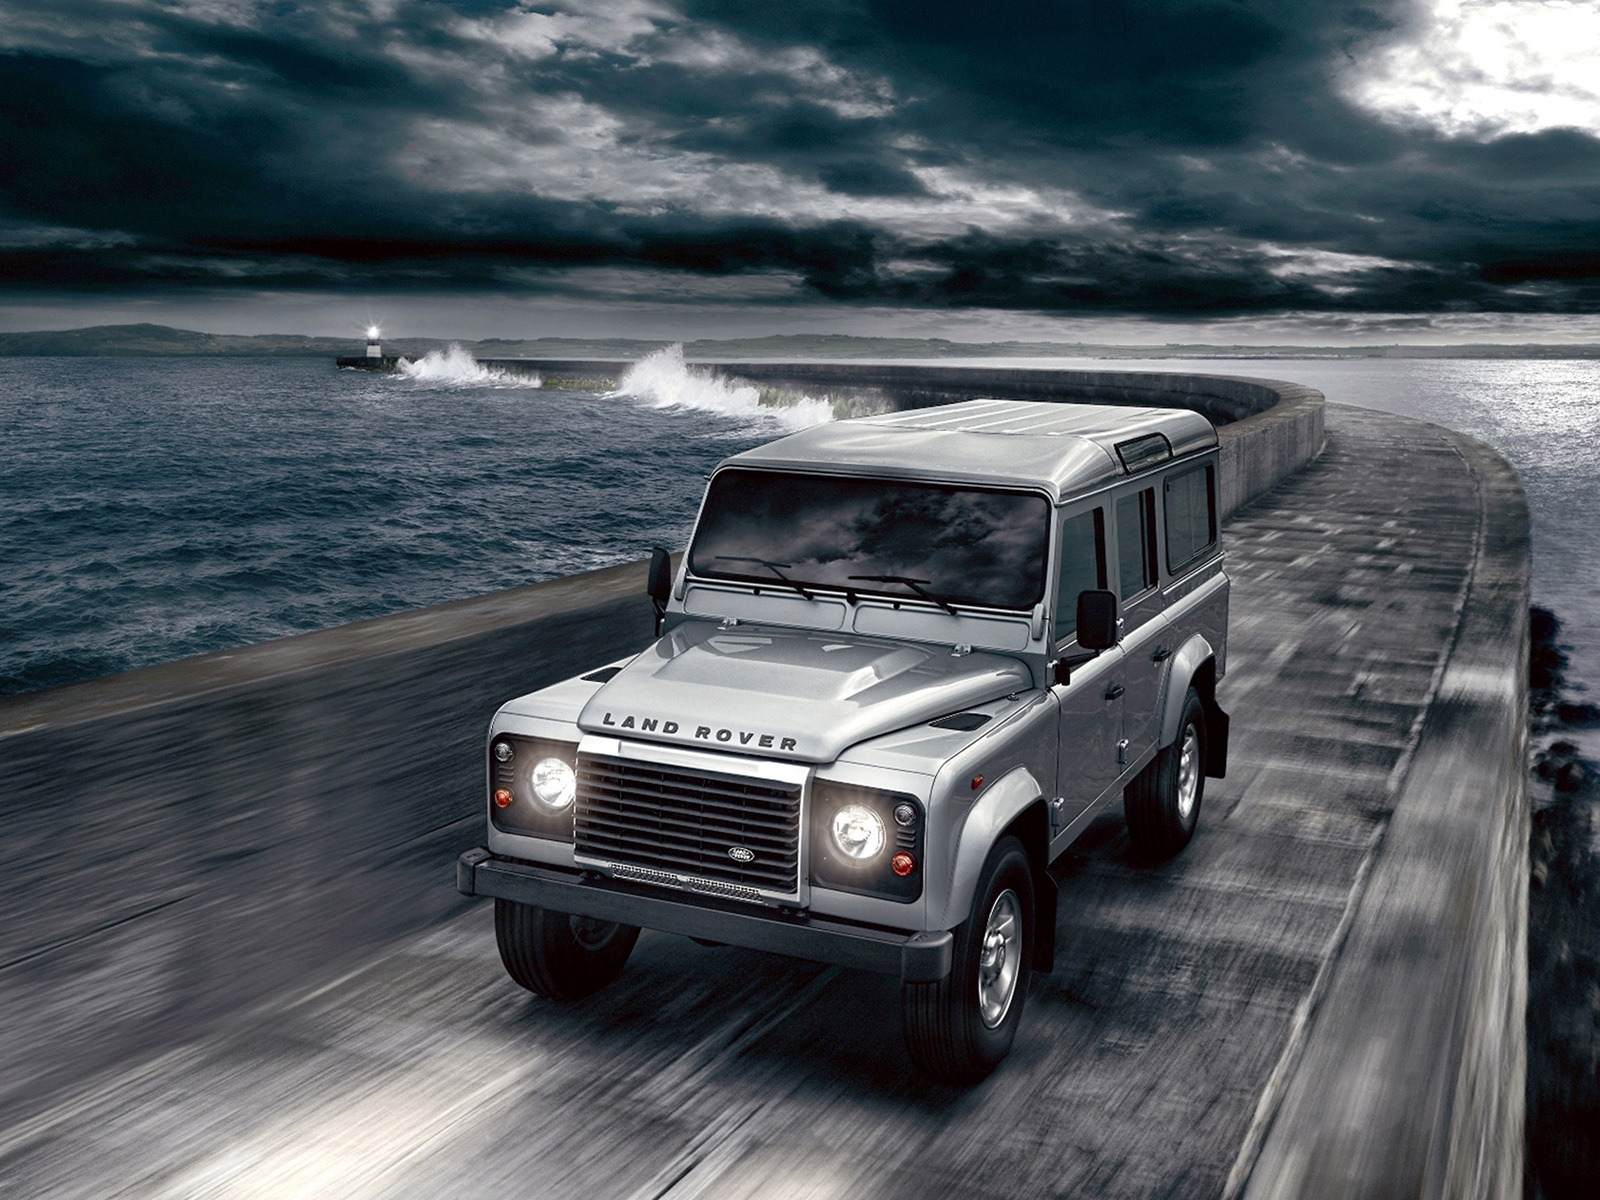 2012 Land Rover Defender for 1600 x 1200 resolution